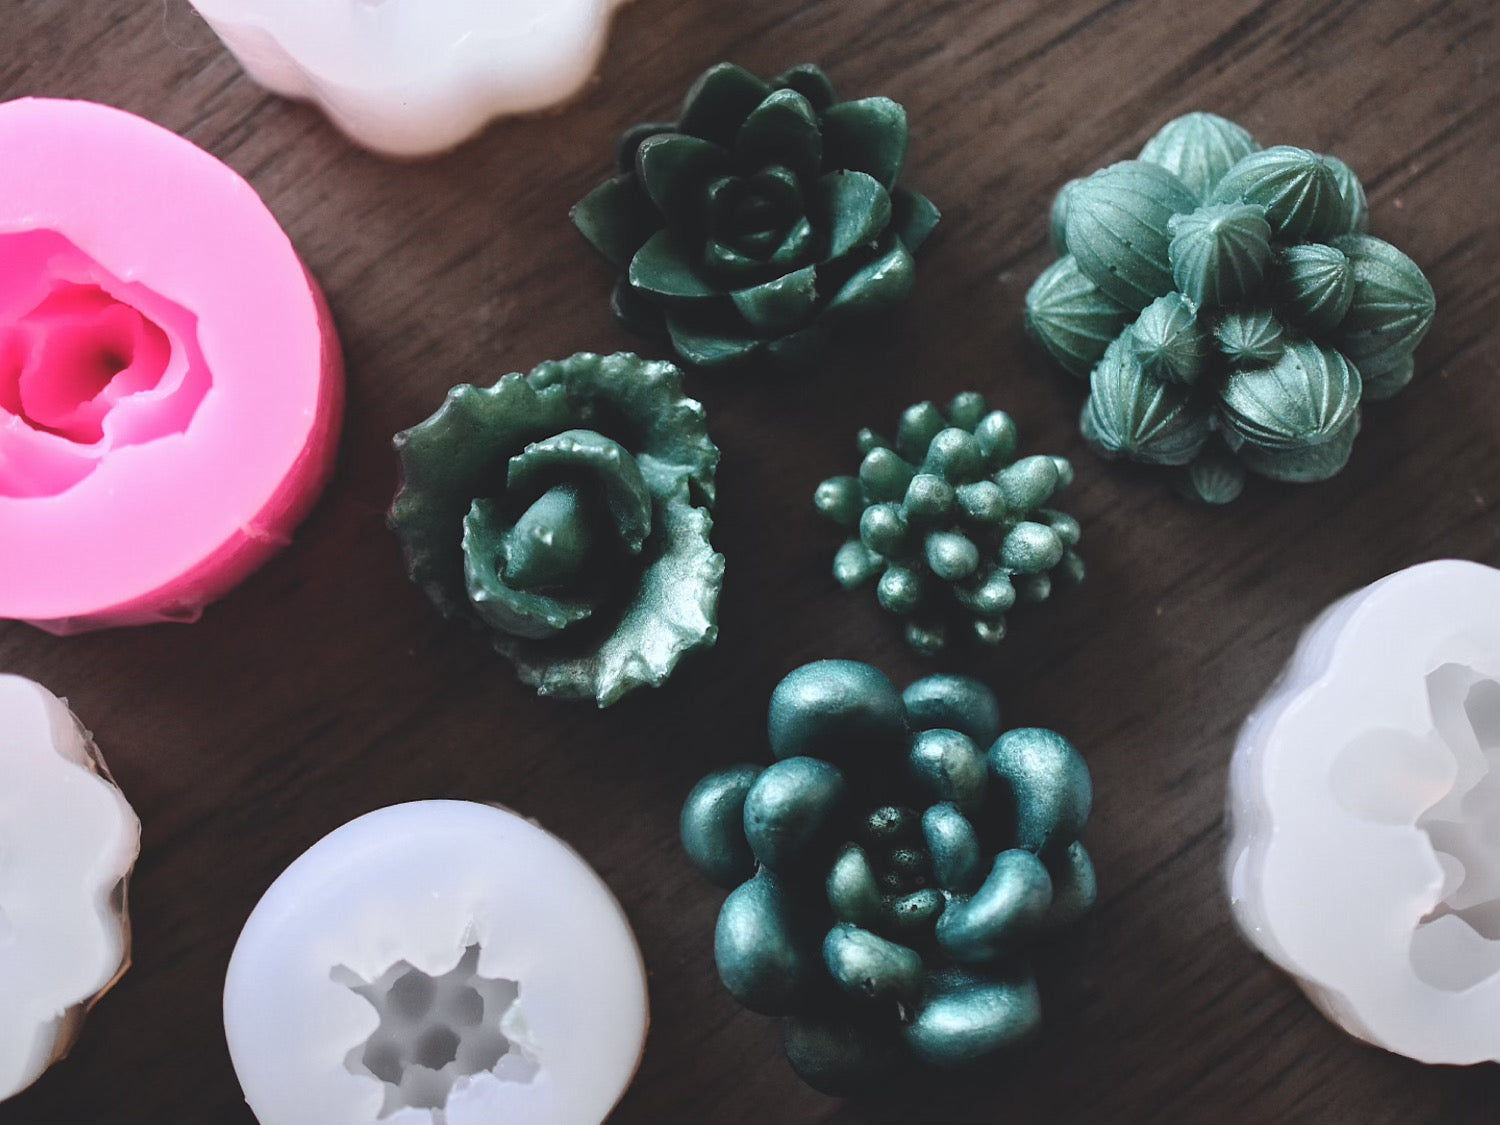 A set of five small molds in the shape of various succulent flowers. The mold color varies between clear and pink.